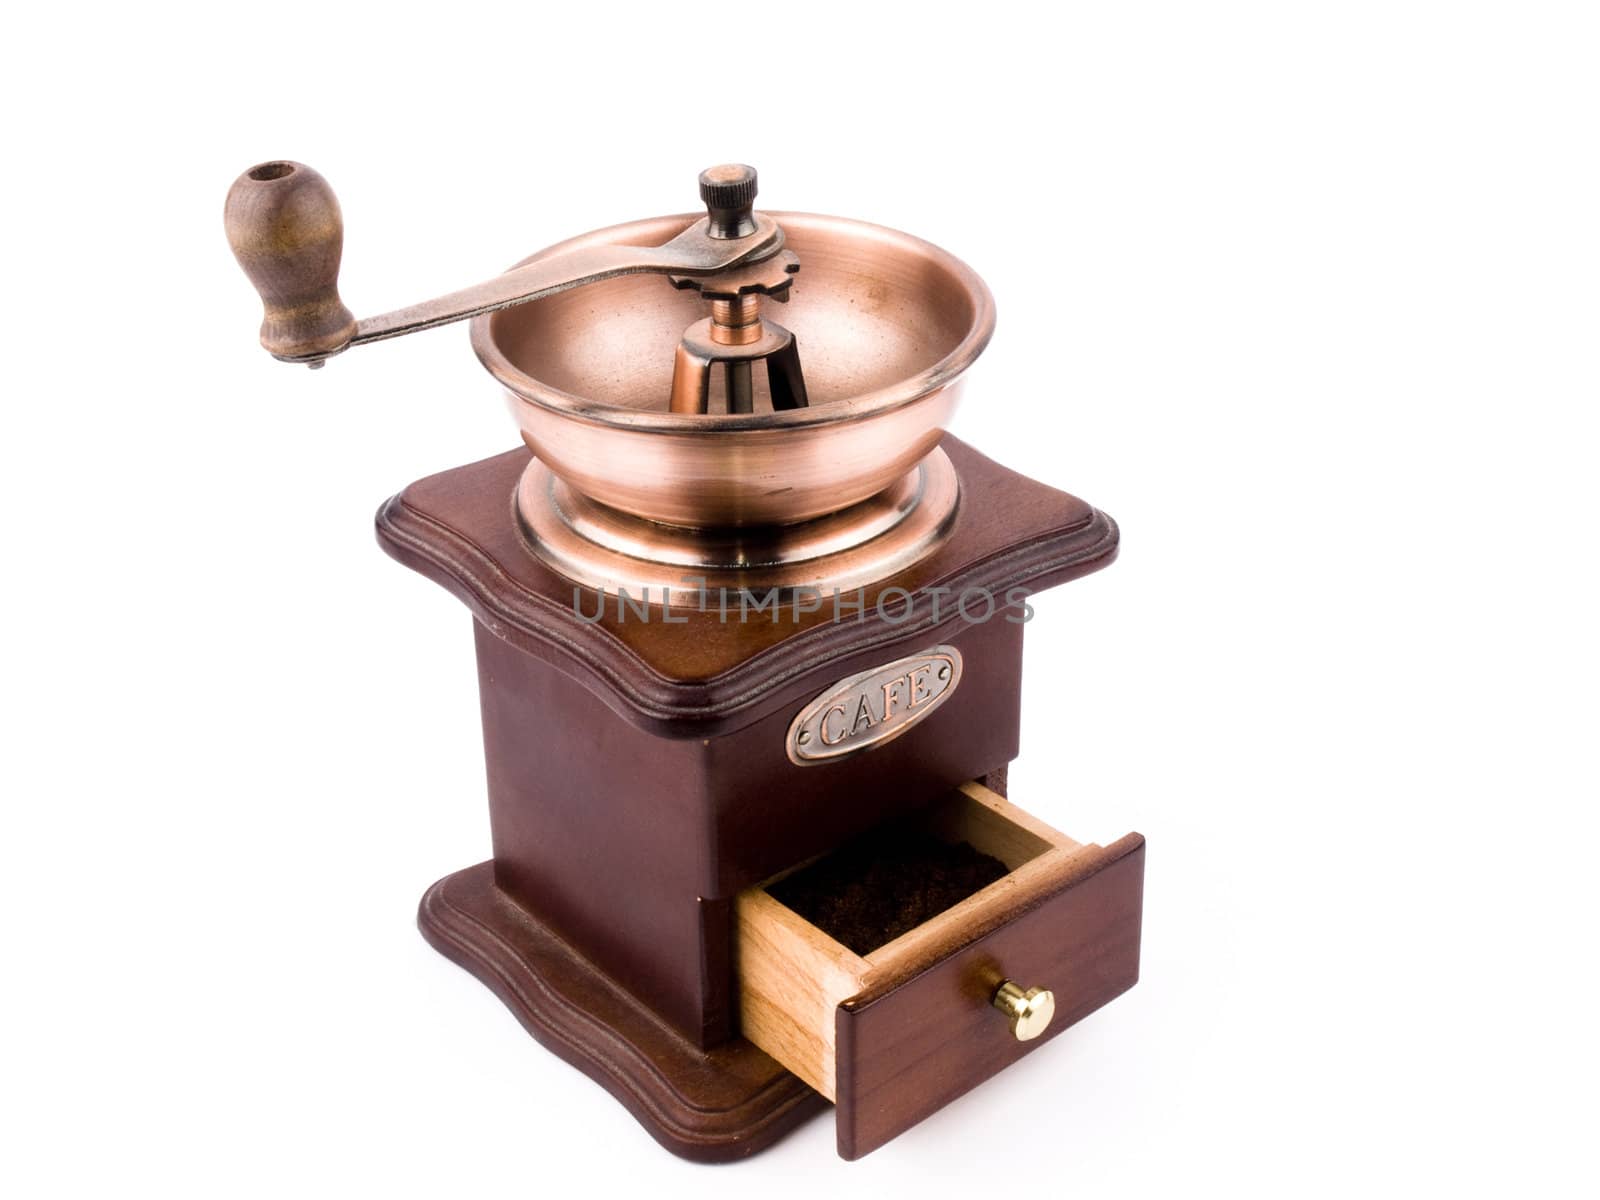 Old-fashioned coffe-mill on white background